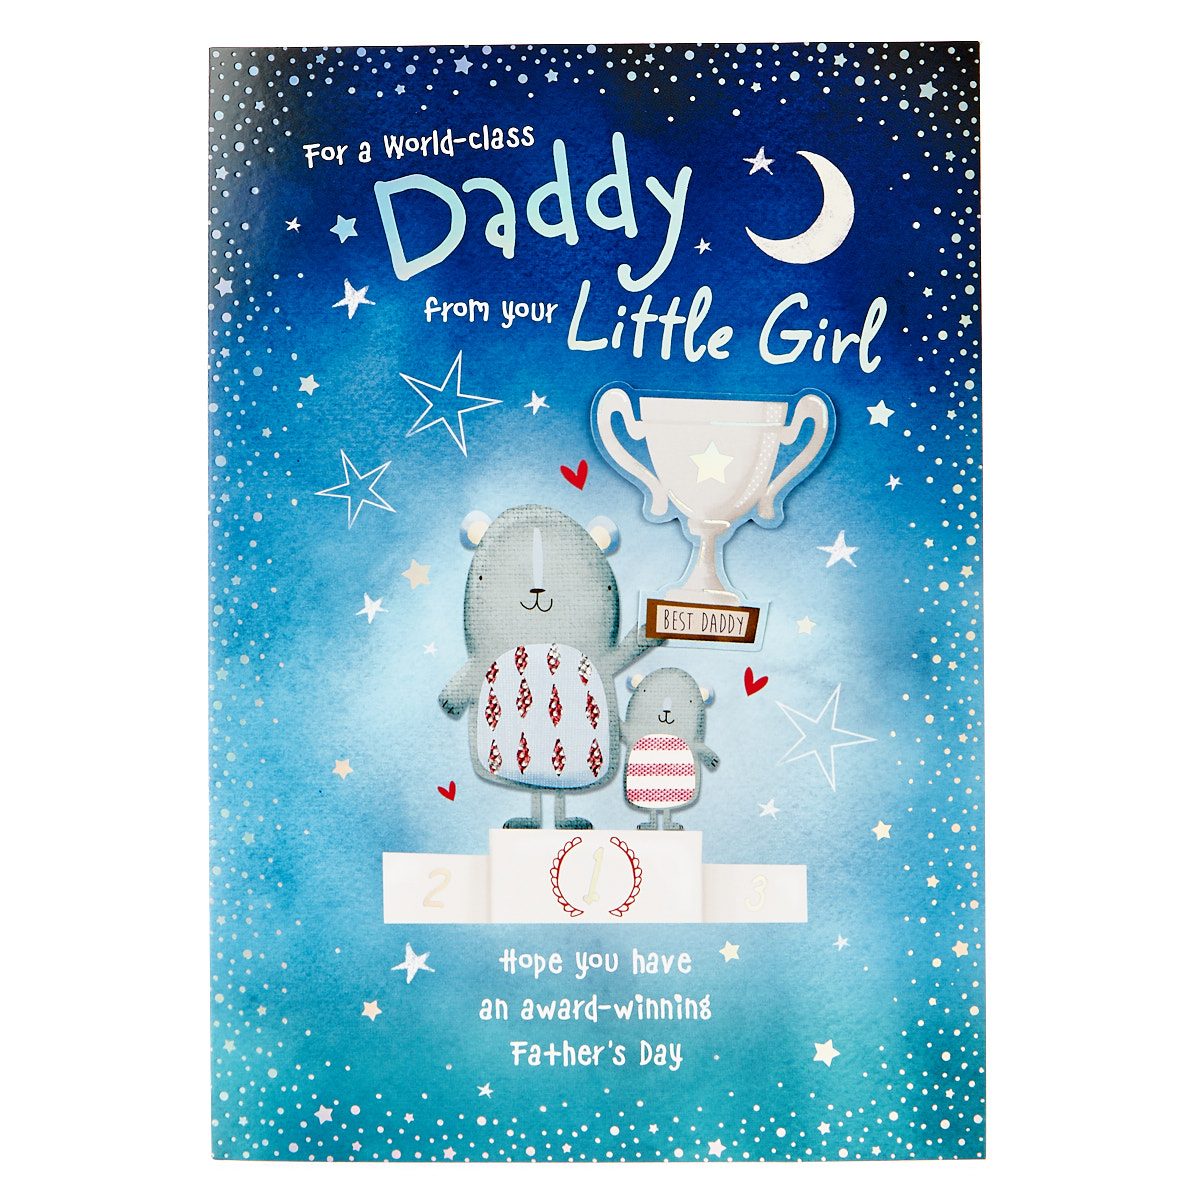 Father's Day Card - World-Class Daddy From Little Girl